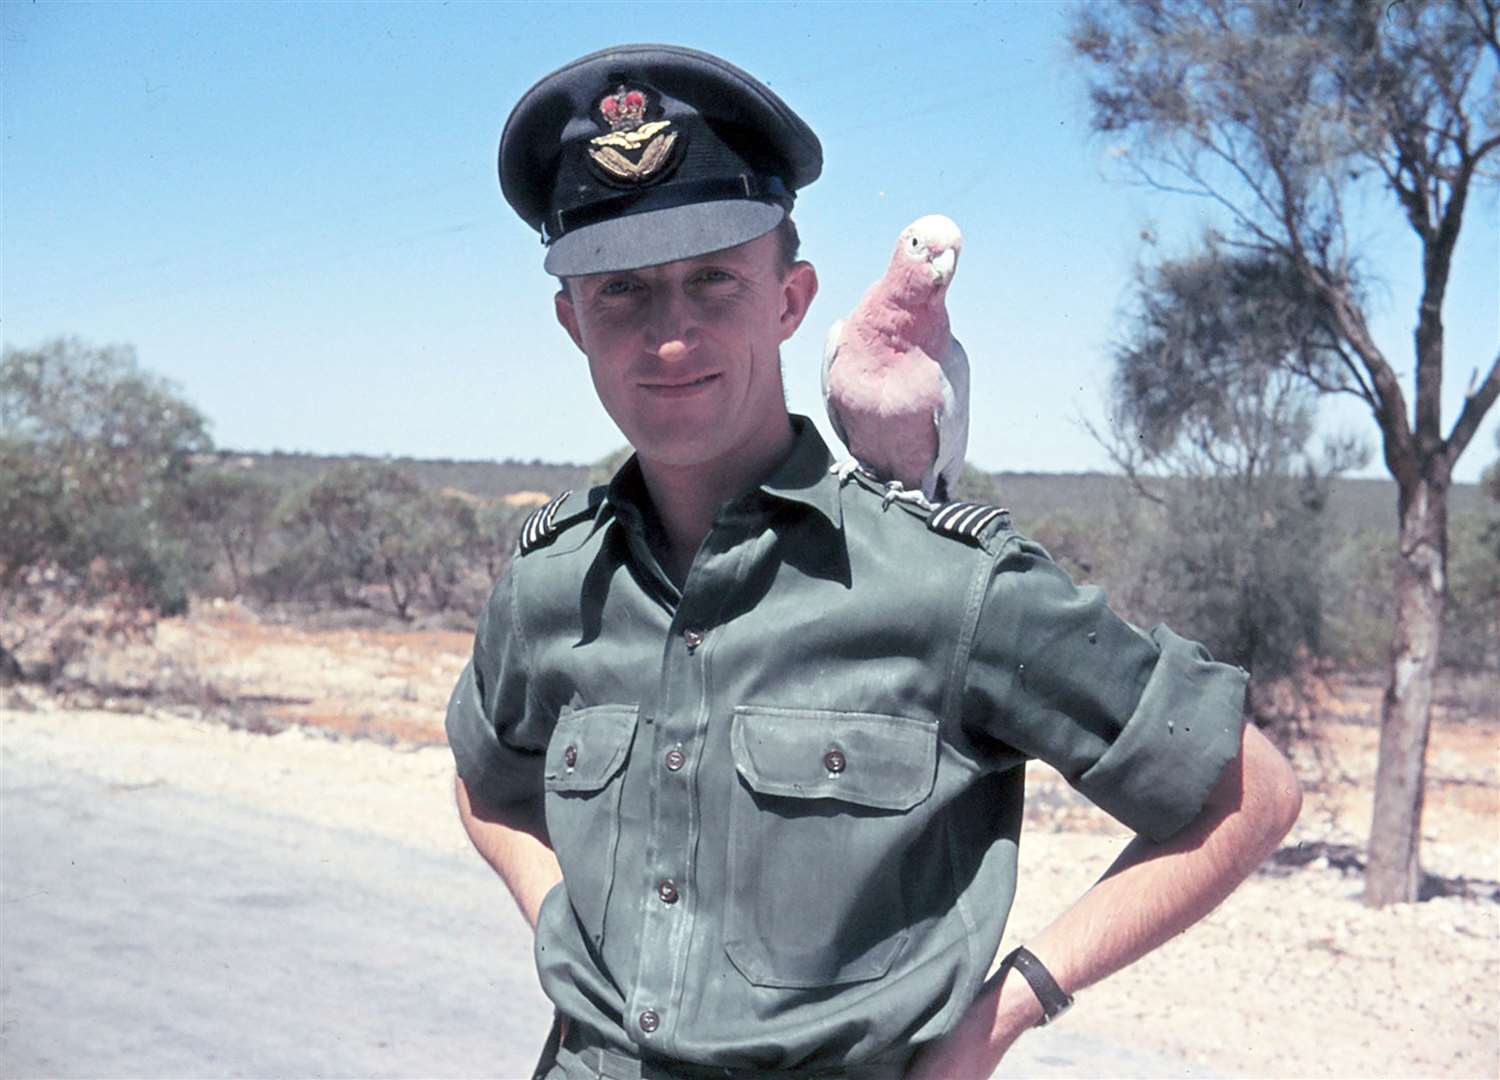 Flight Lieutenant David Purse serving at Maralinga, Australia, in 1962 and 1963 when nuclear tests were carried out (Family handout/PA)